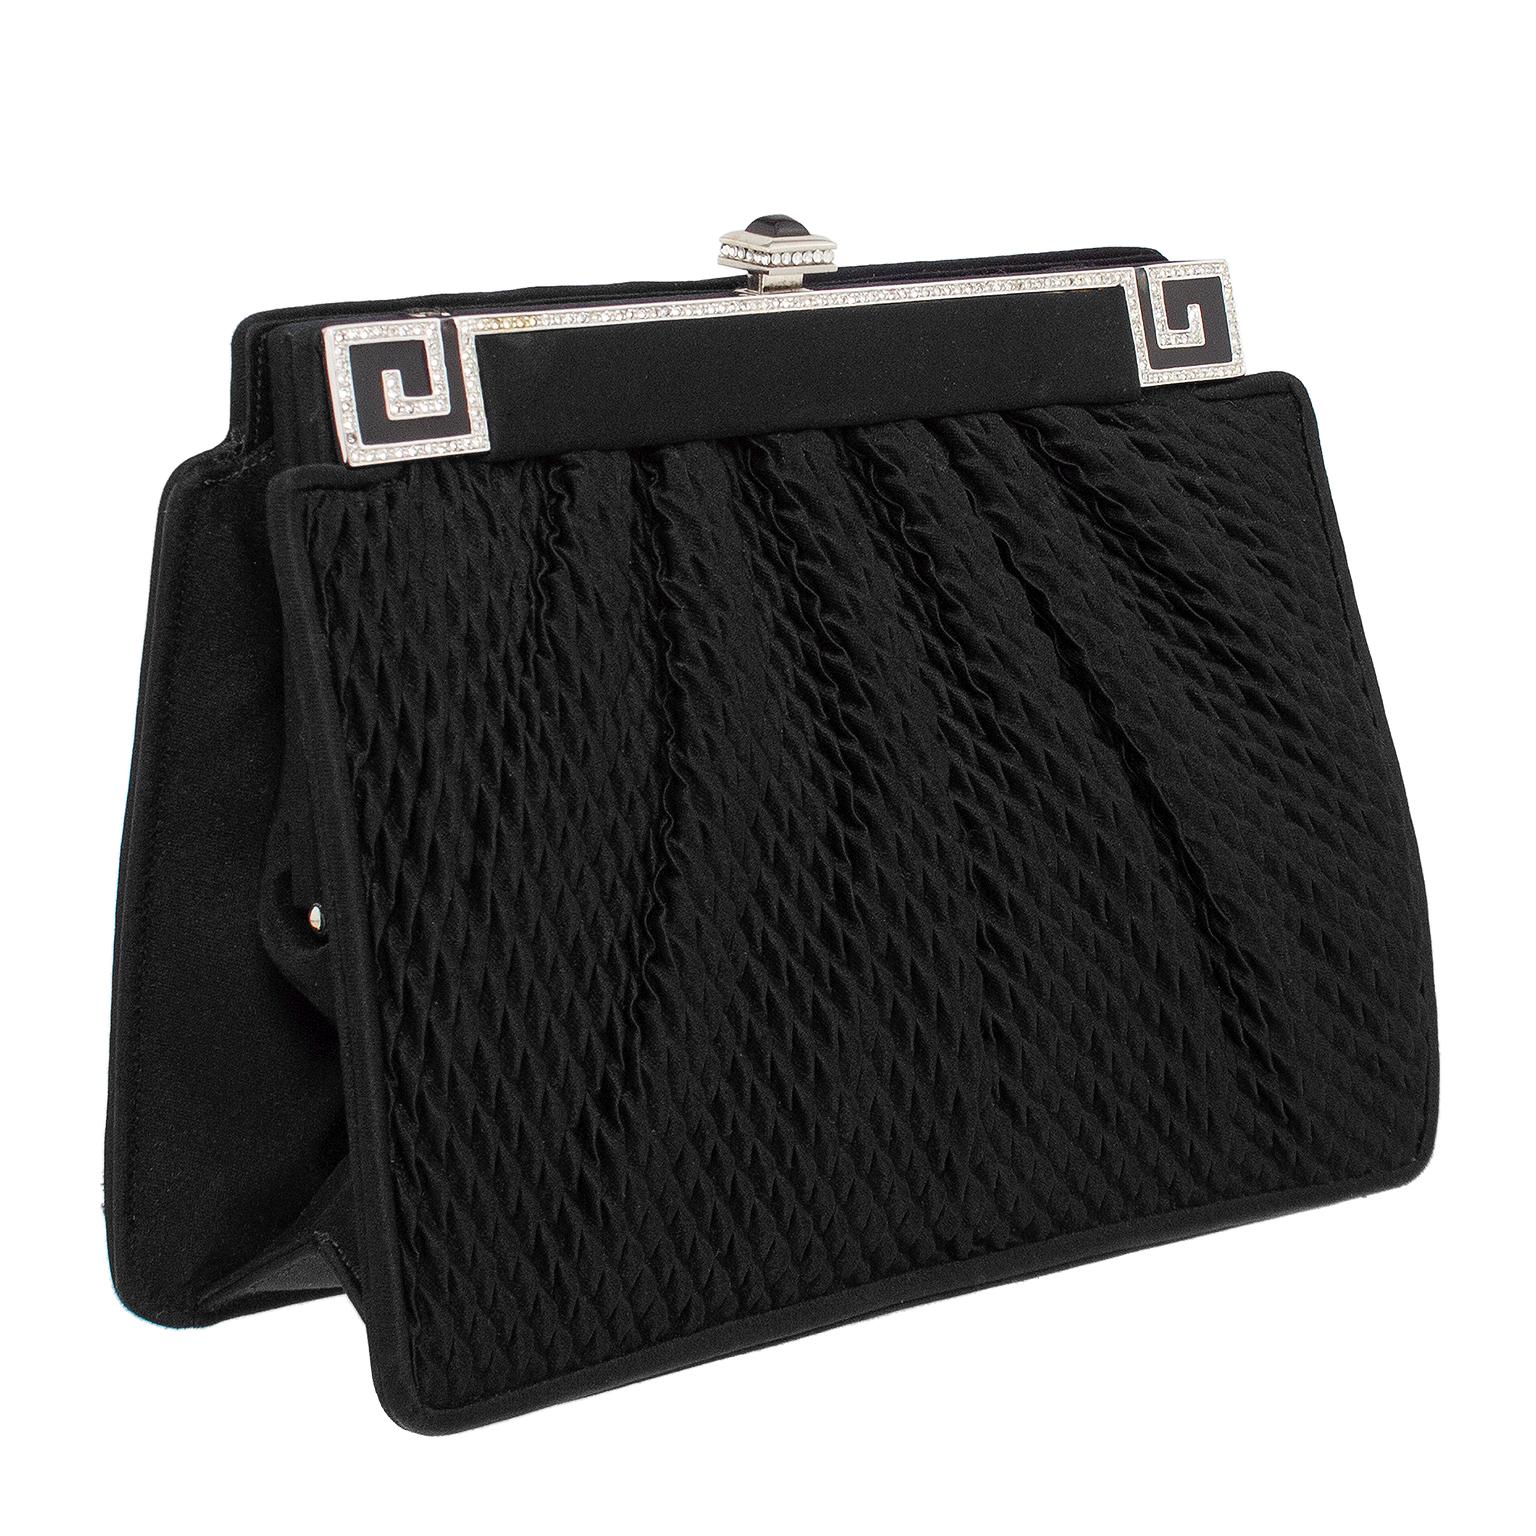 This 1990s Judith Leiber frame style evening bag will take you from a date night dinner to a black tie event. This bag features black textured ripple effect silk that is ruched. The frame is covered in black silk with silver tone metal greek key